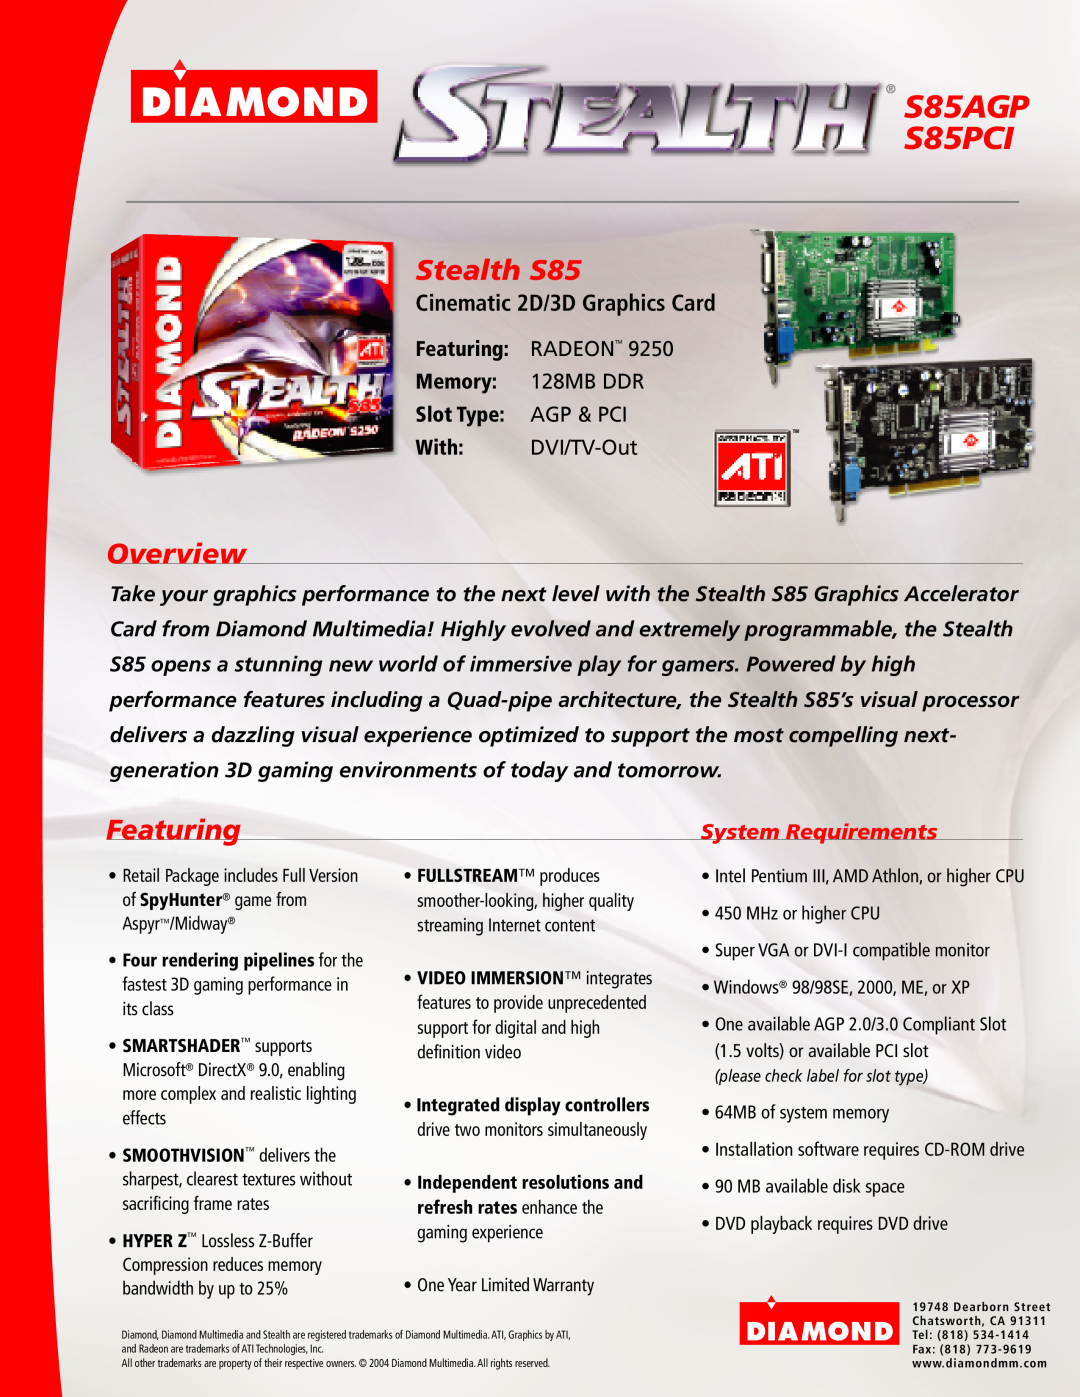 Diamond Multimedia warranty S85AGP S85PCI, Stealth S85, Overview, Featuring, Cinematic 2D/3D Graphics Card 